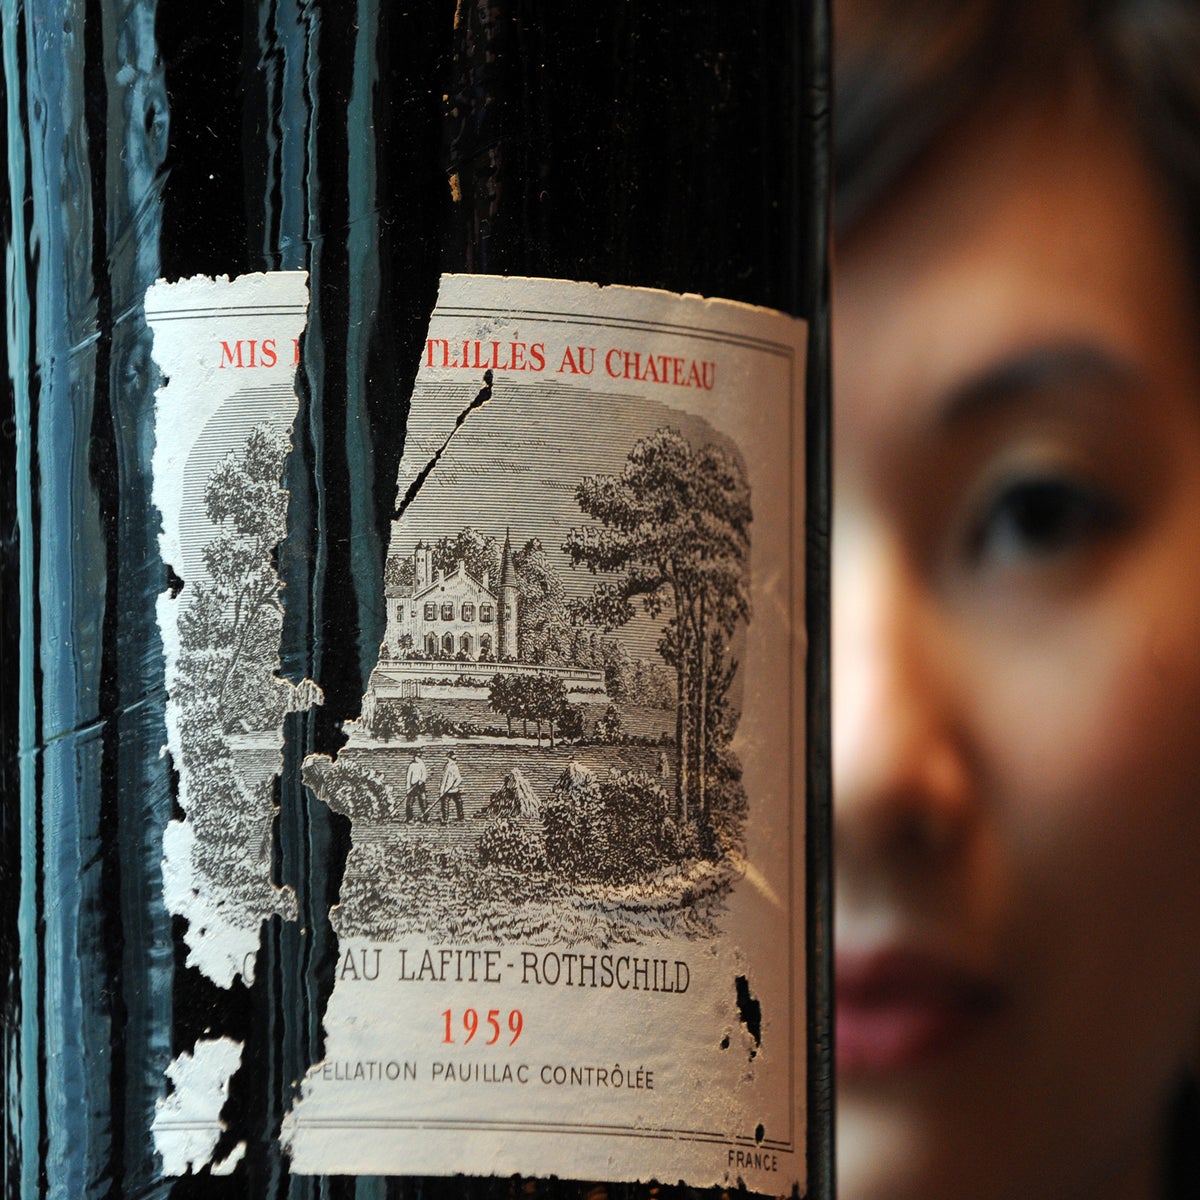 Louis Vuitton family launches wine for Chinese market